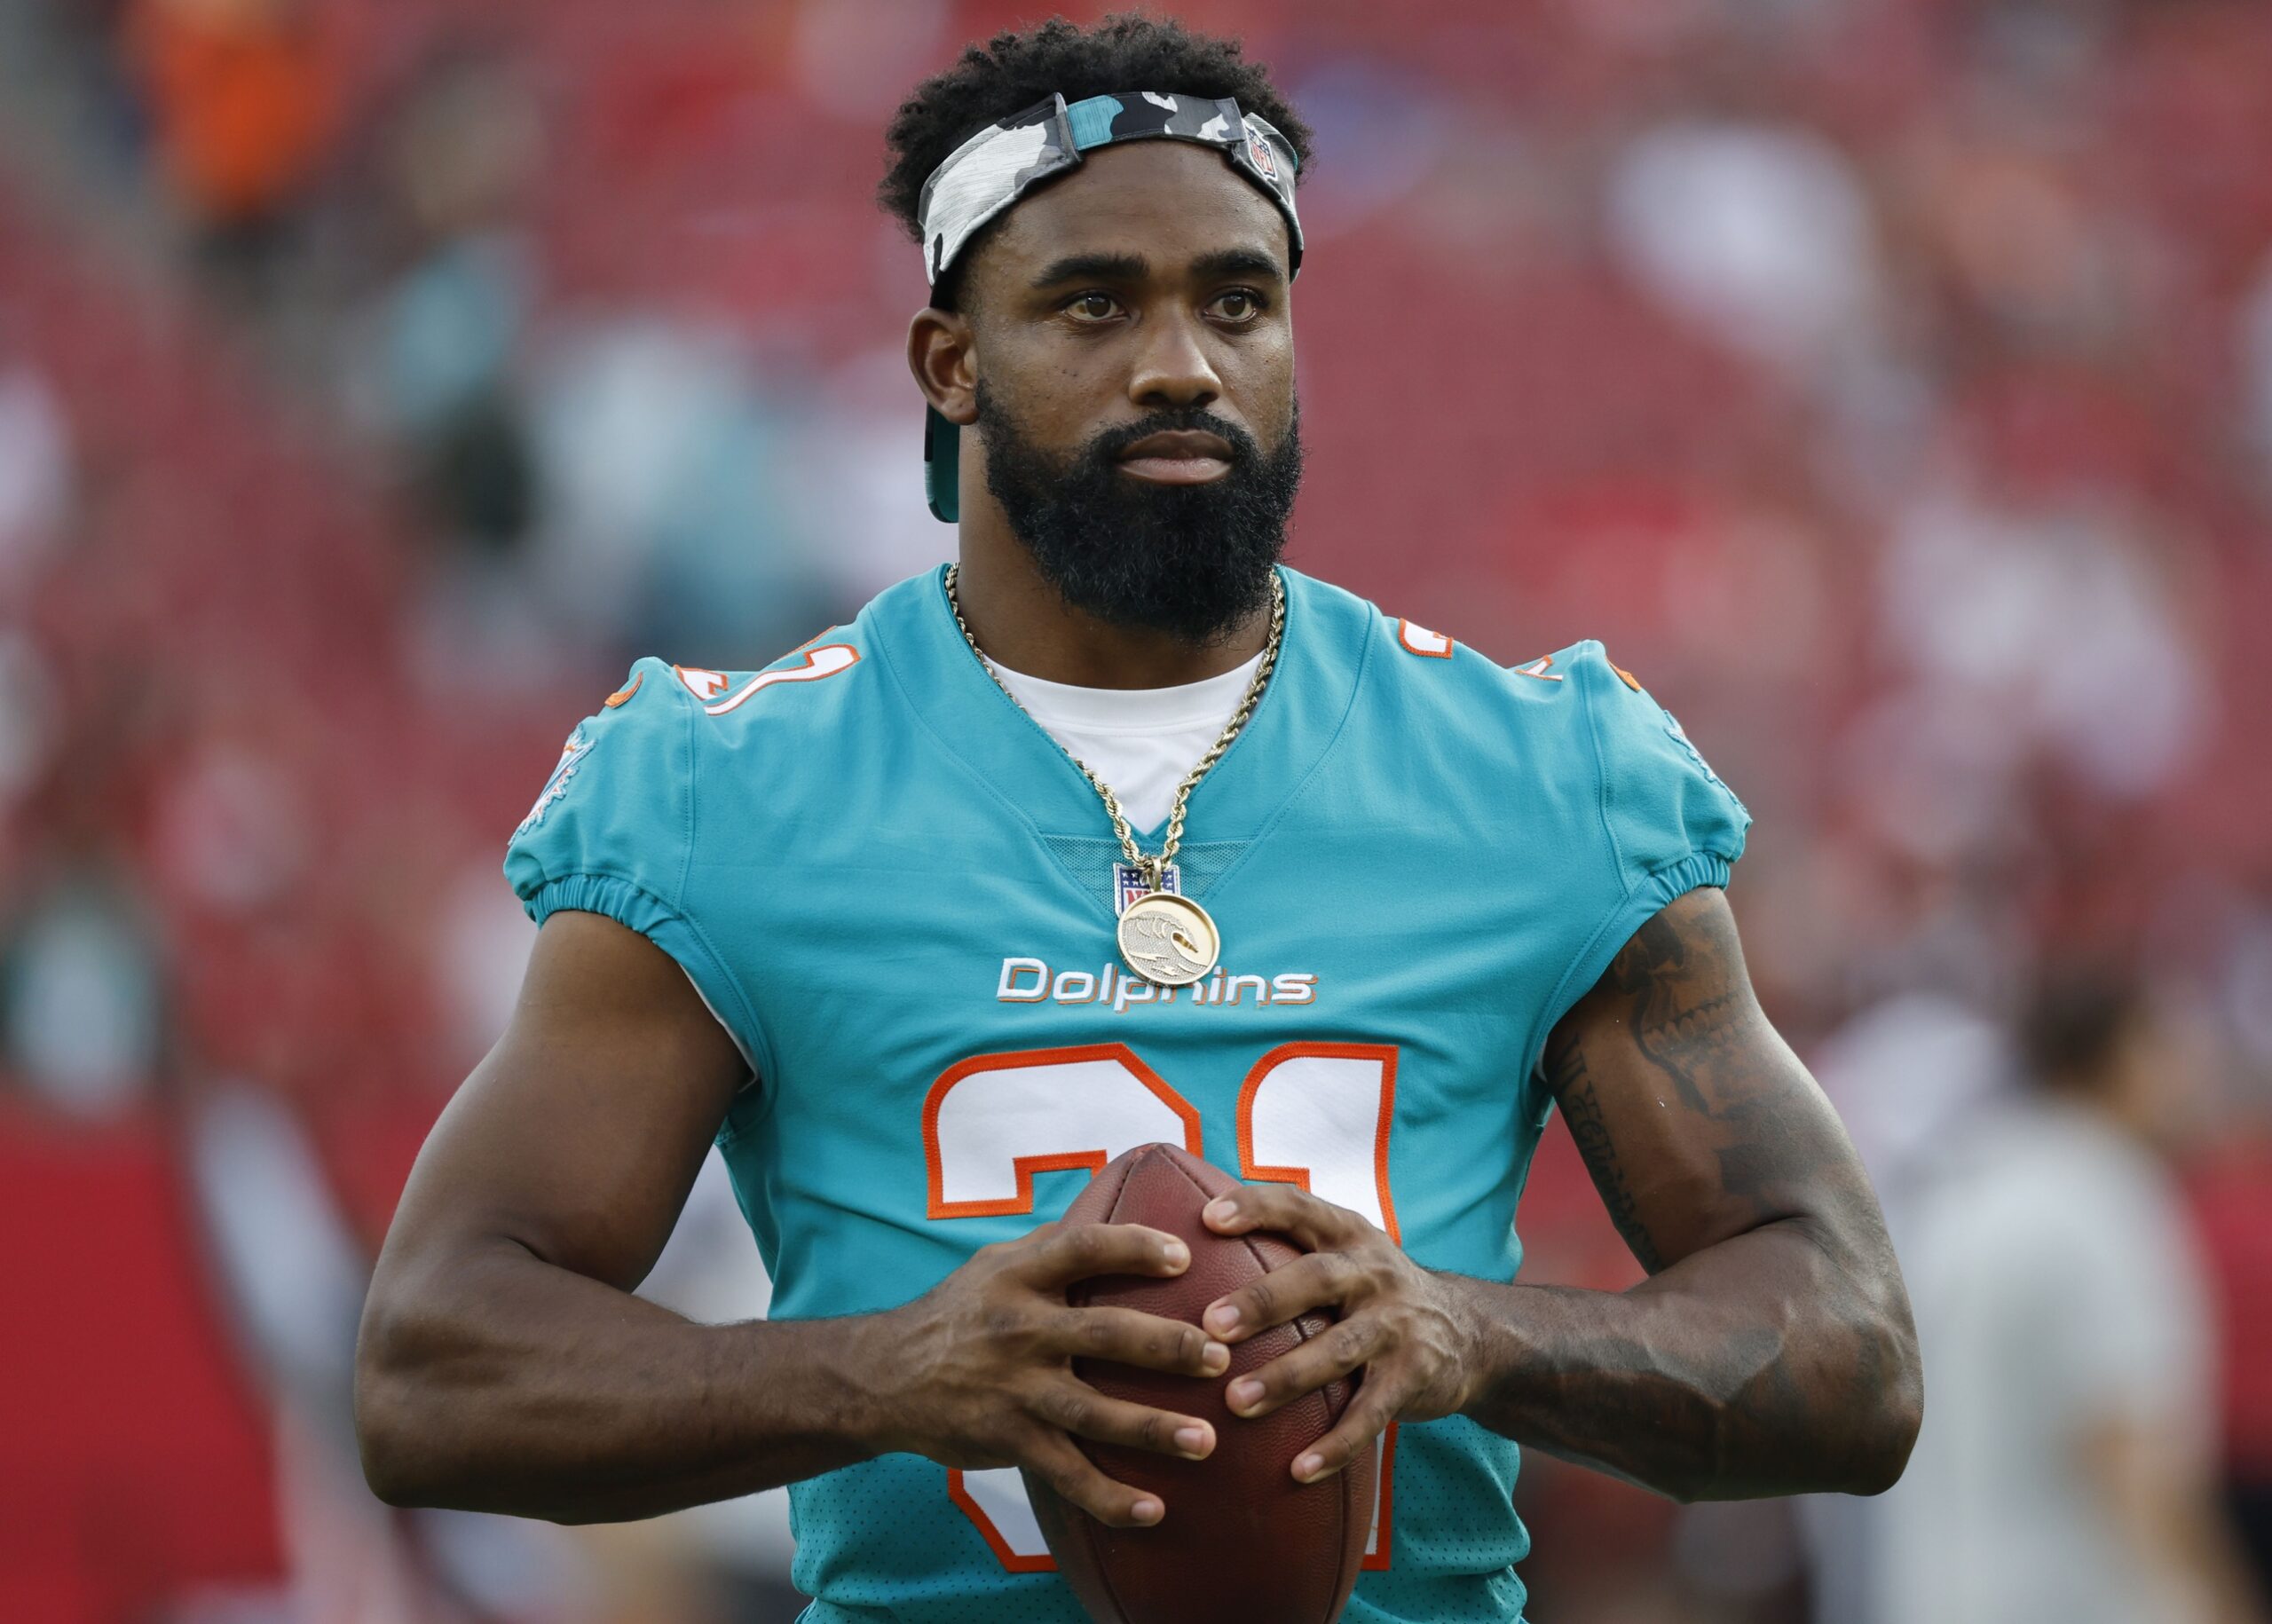 Raheem Mostert from the Dolphins Says He's the Quickest Player on the 'fastest Team in the NFL